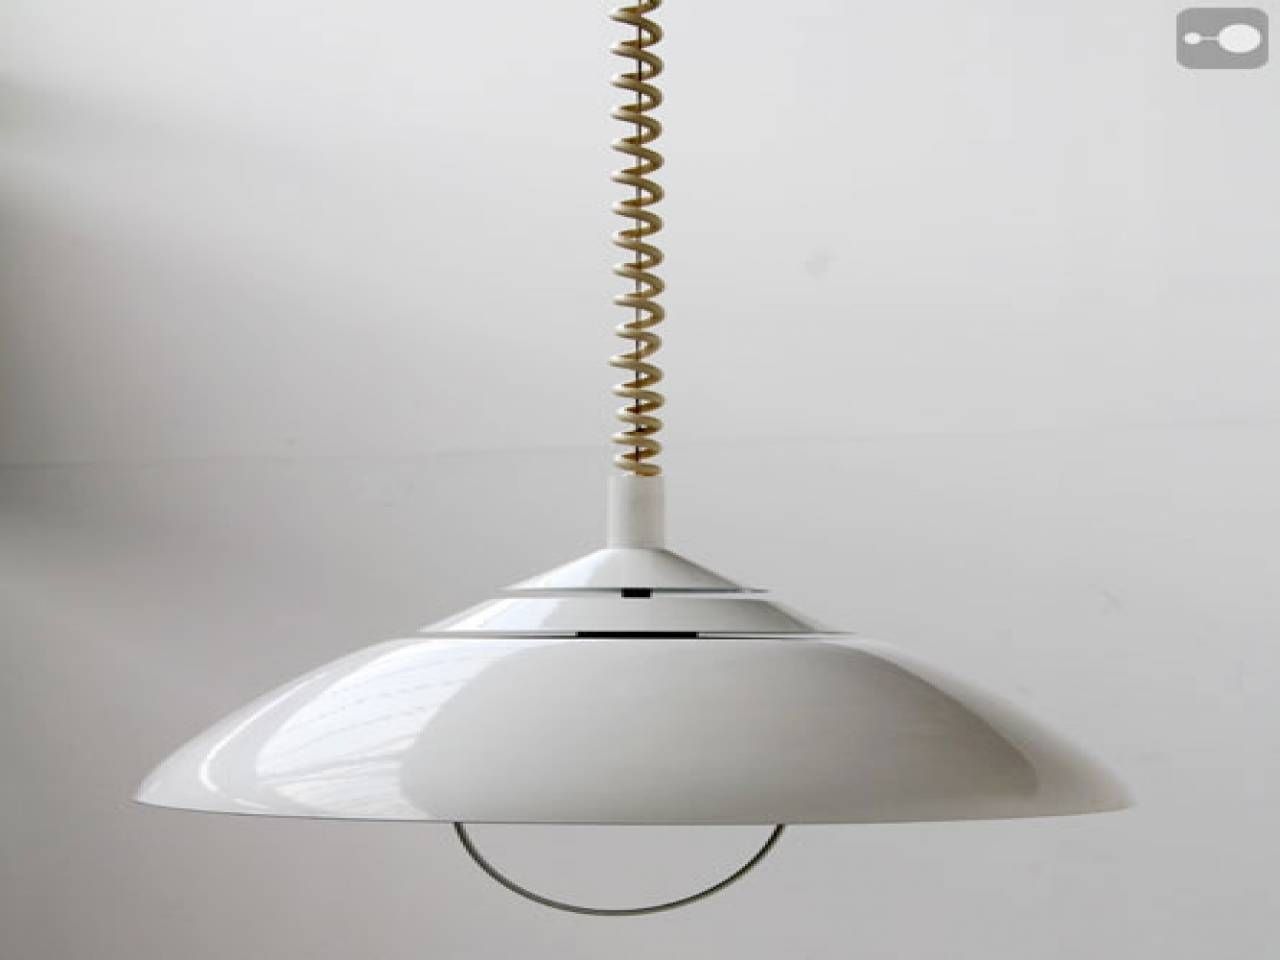 Epic Pull Down Ceiling Light 64 For Your Red Pendant Lights For With Regard To Pull Down Pendant Lights Fixtures (View 6 of 15)